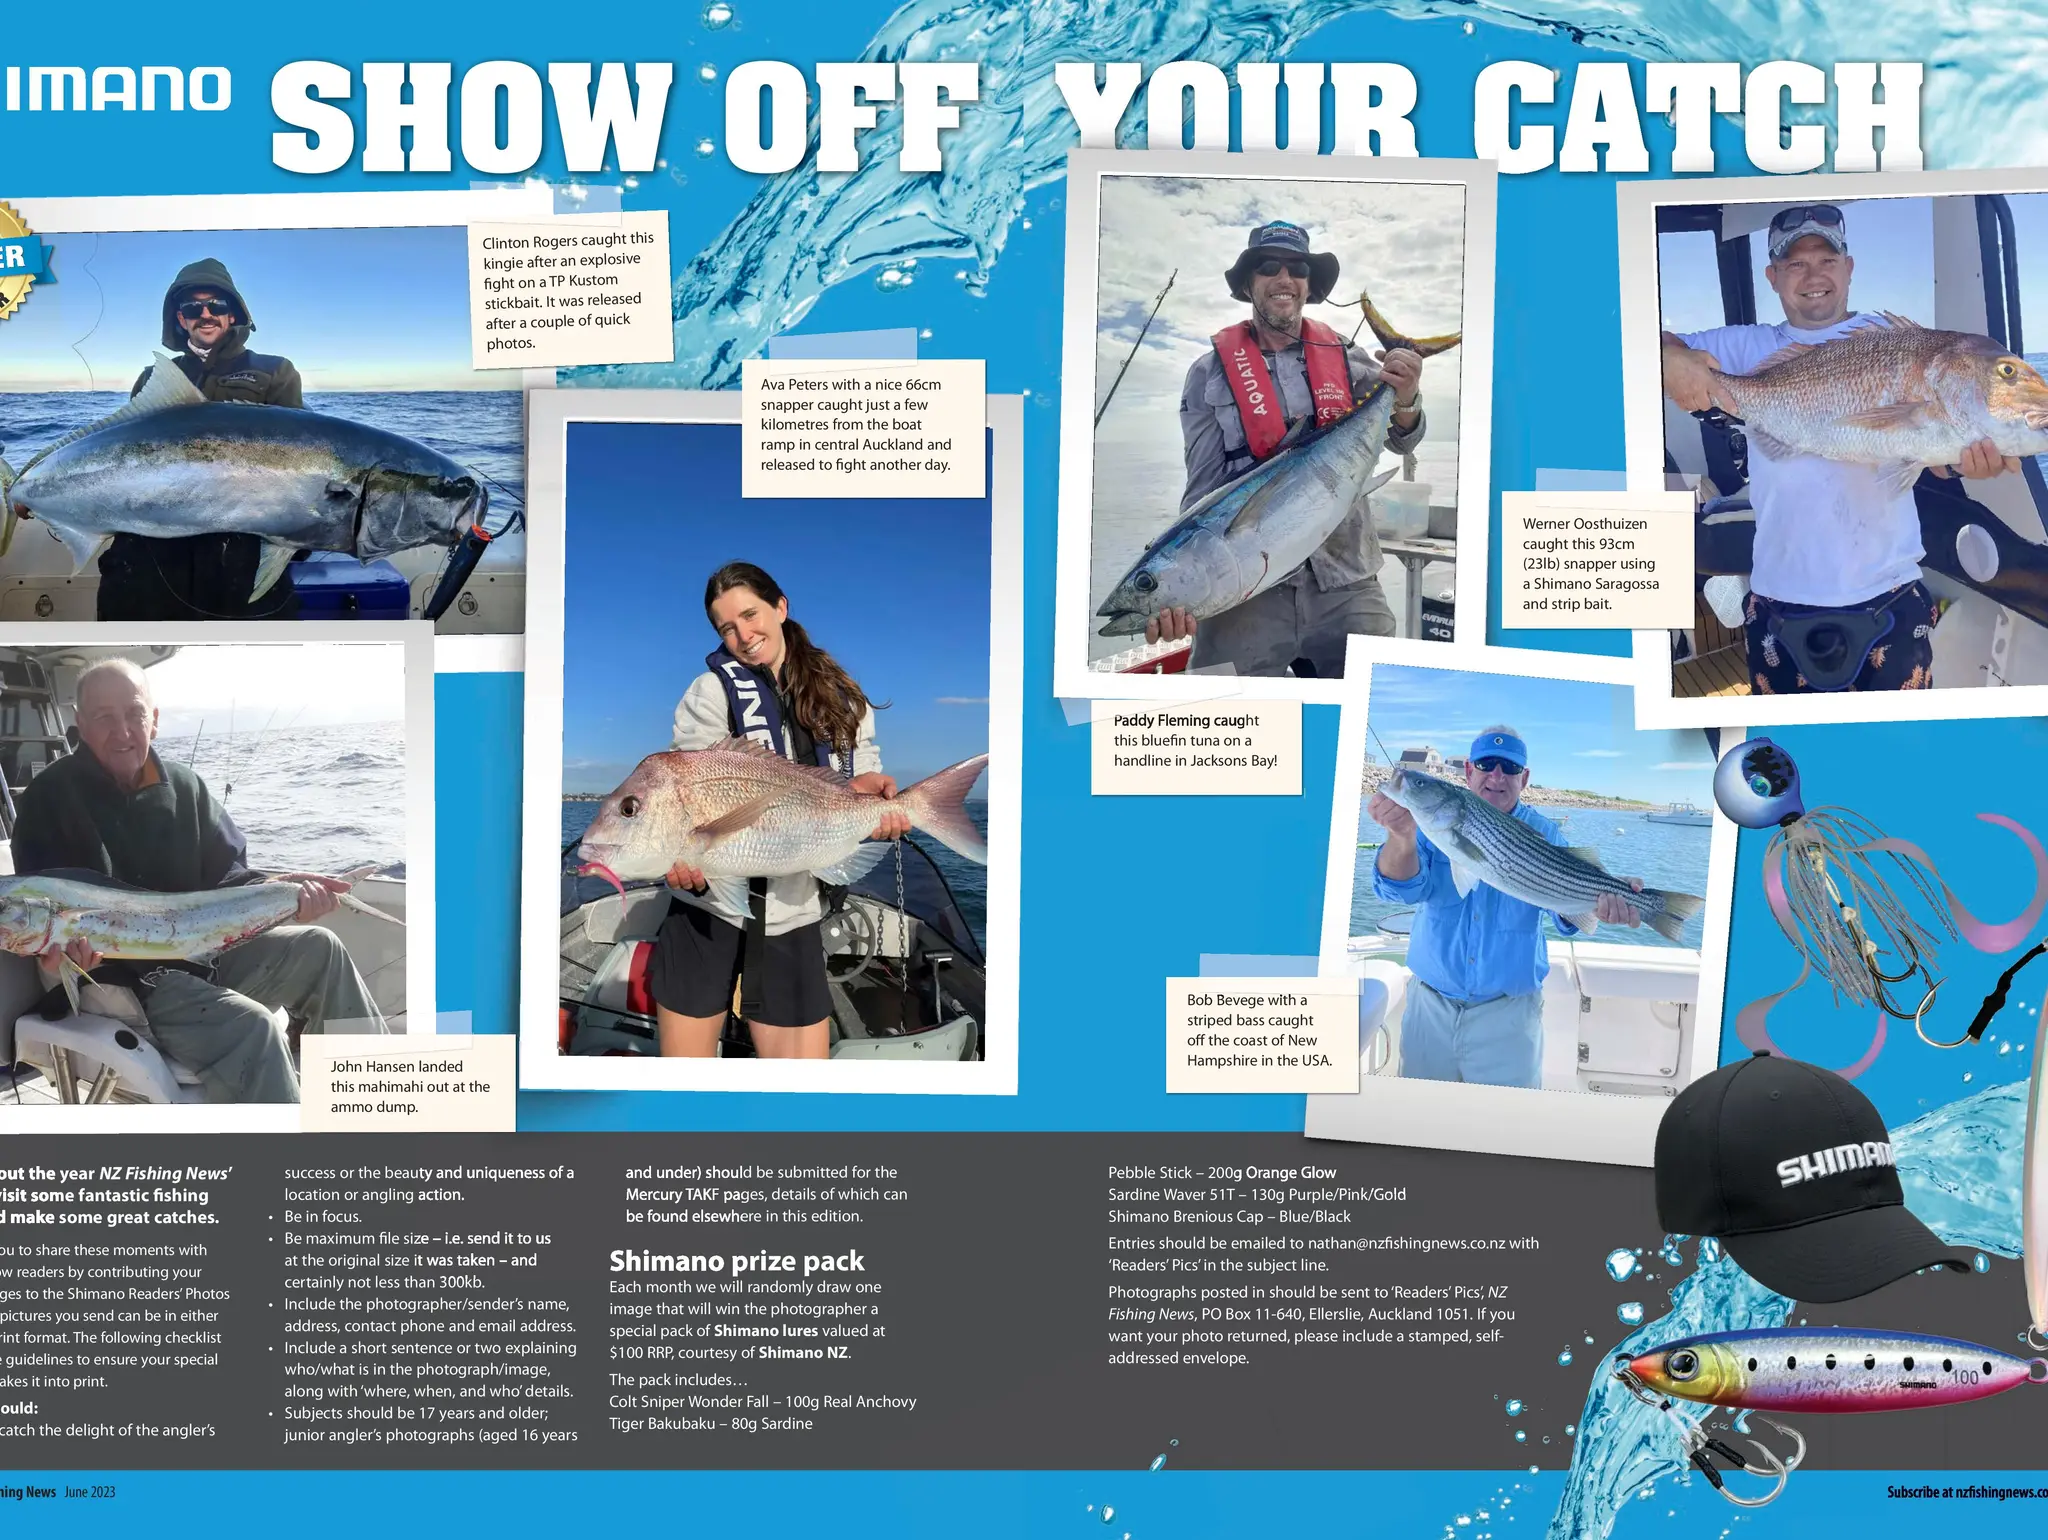 Shimano: SHOW OFF YOUR CATCH